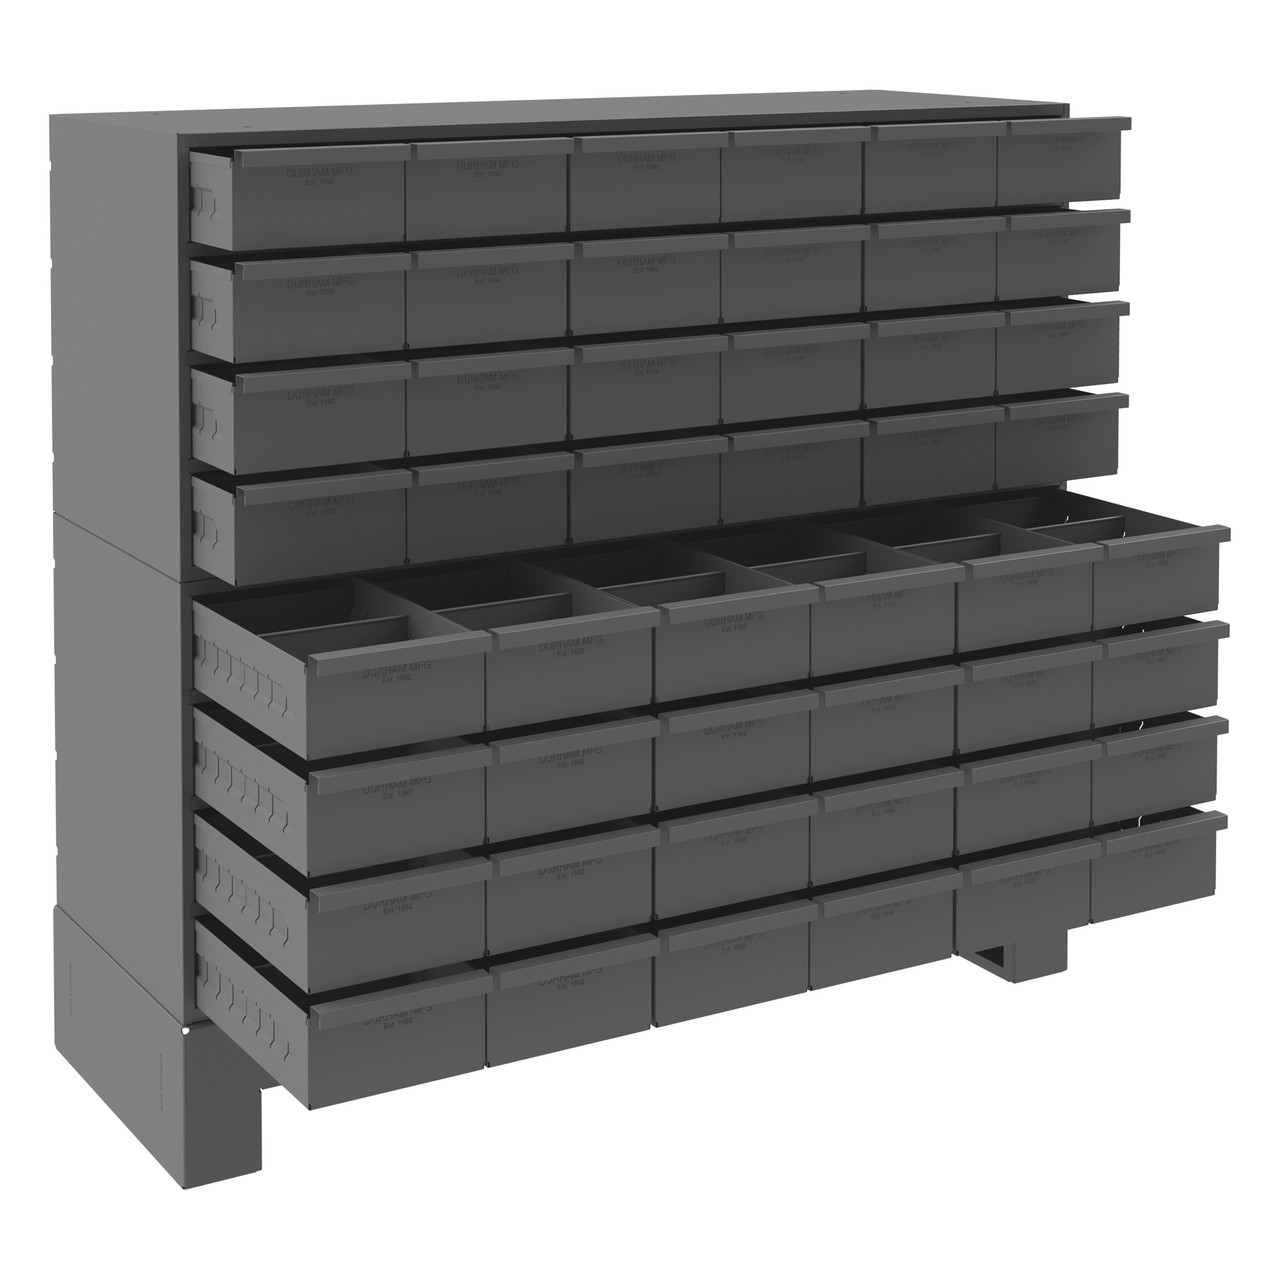 48 Drawers, 12-1/4 Deep, Steel Construction, For Small Part